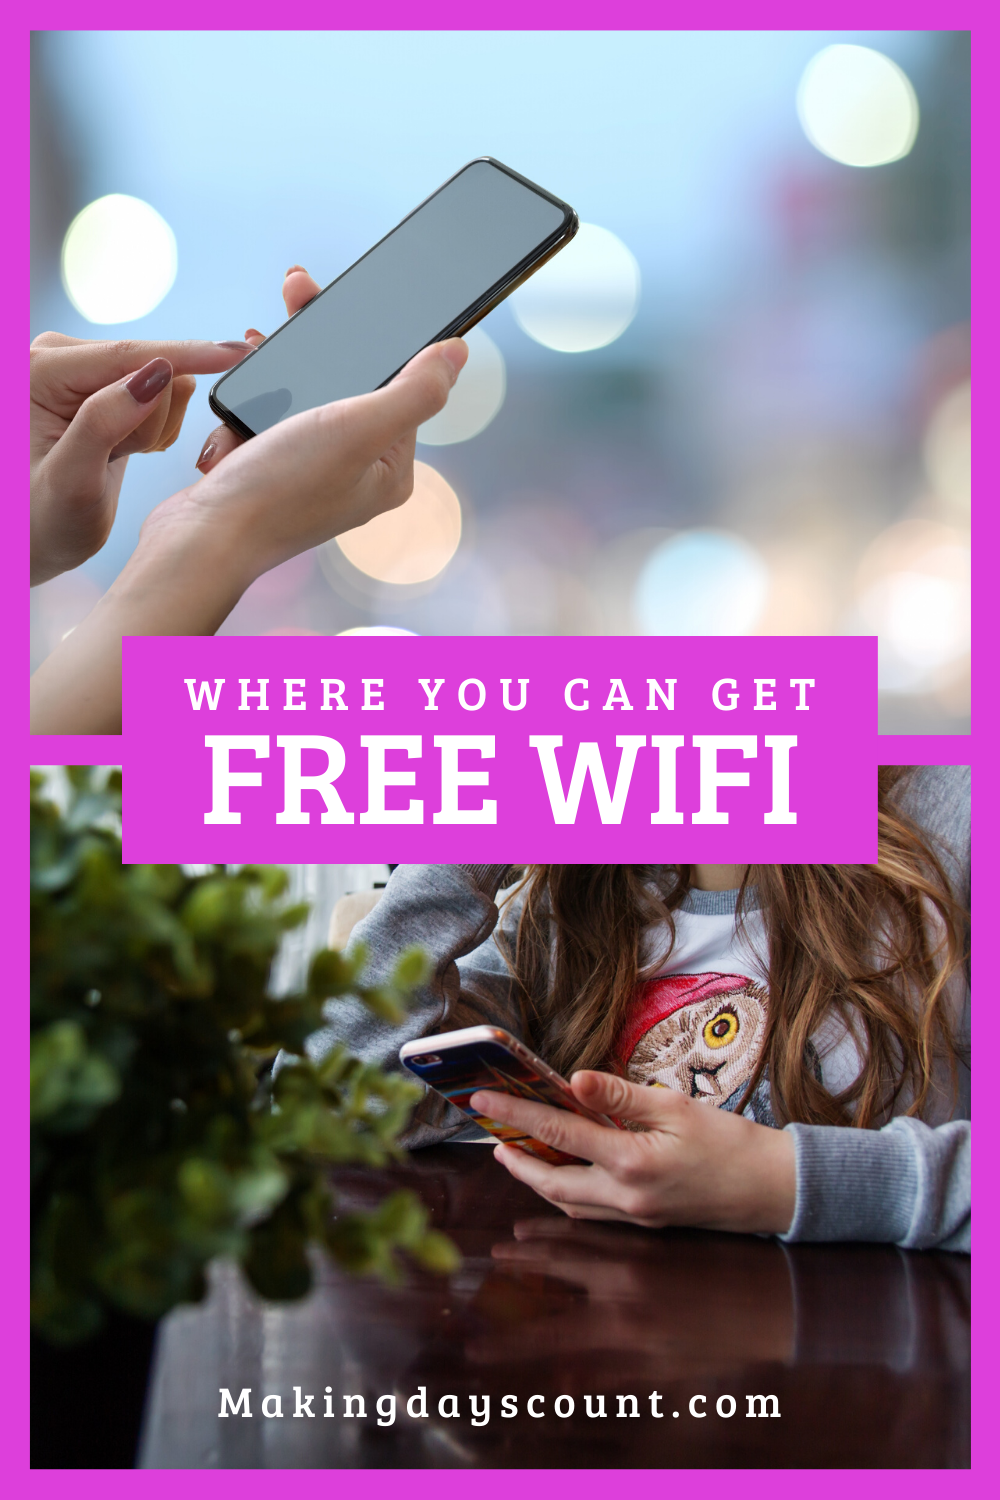 6 Places to get free wifi